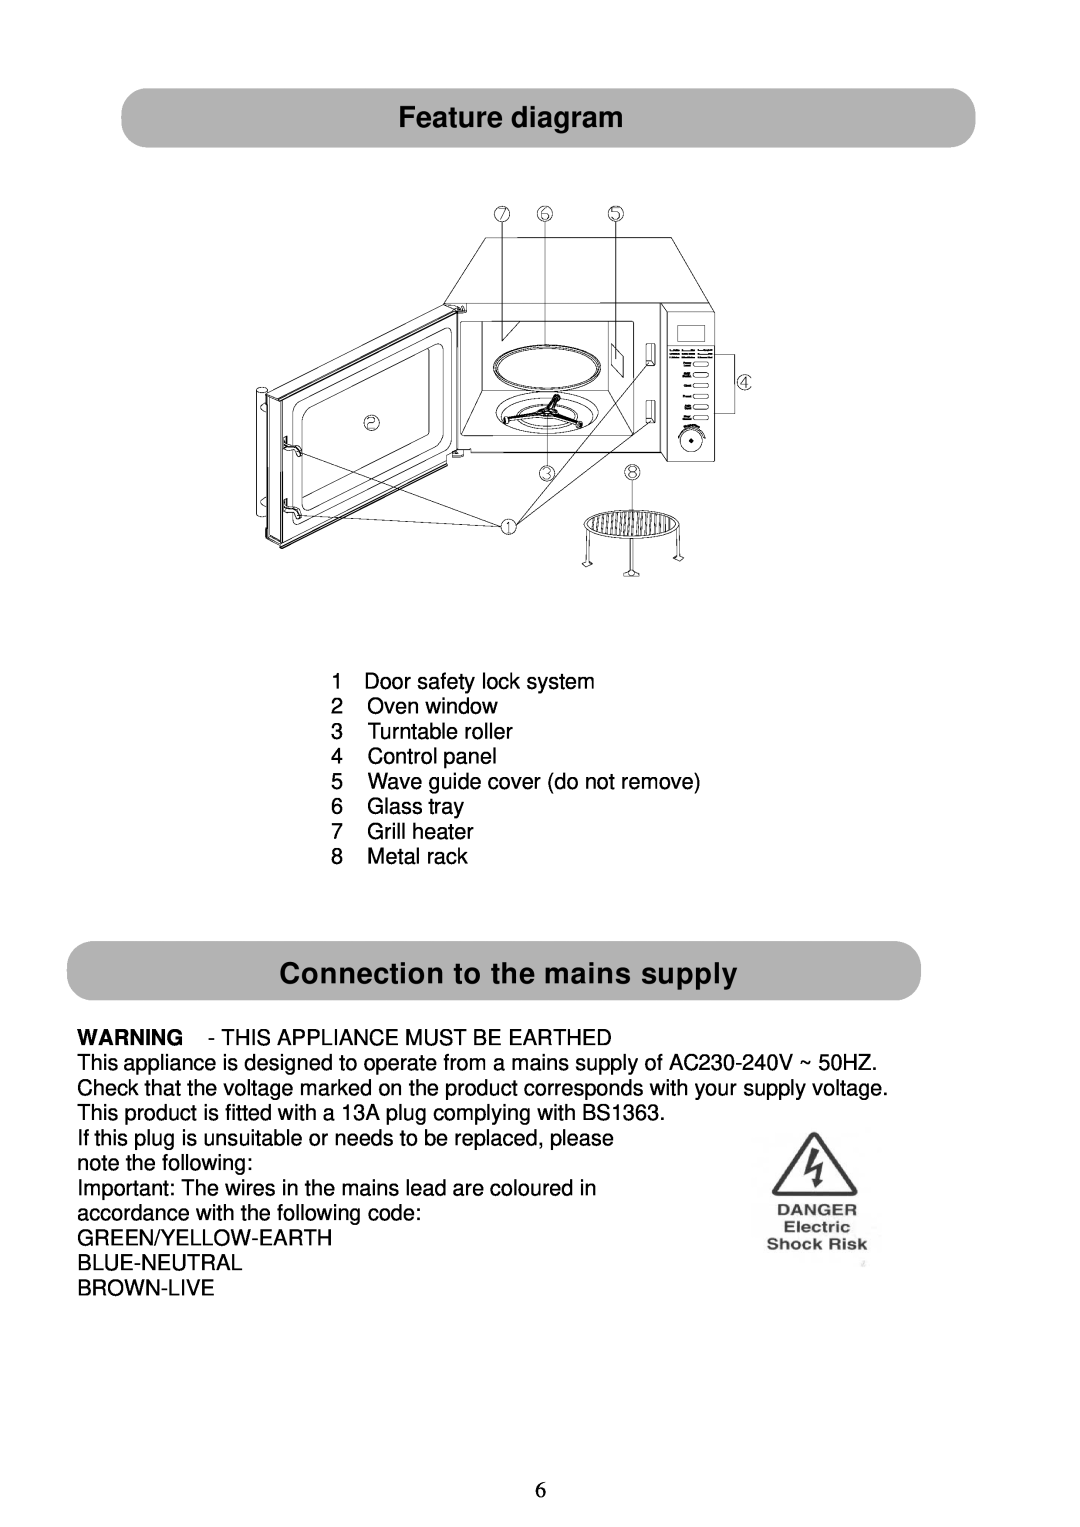 Russell Hobbs RHM2031 user manual Feature diagram, Connection to the mains supply 